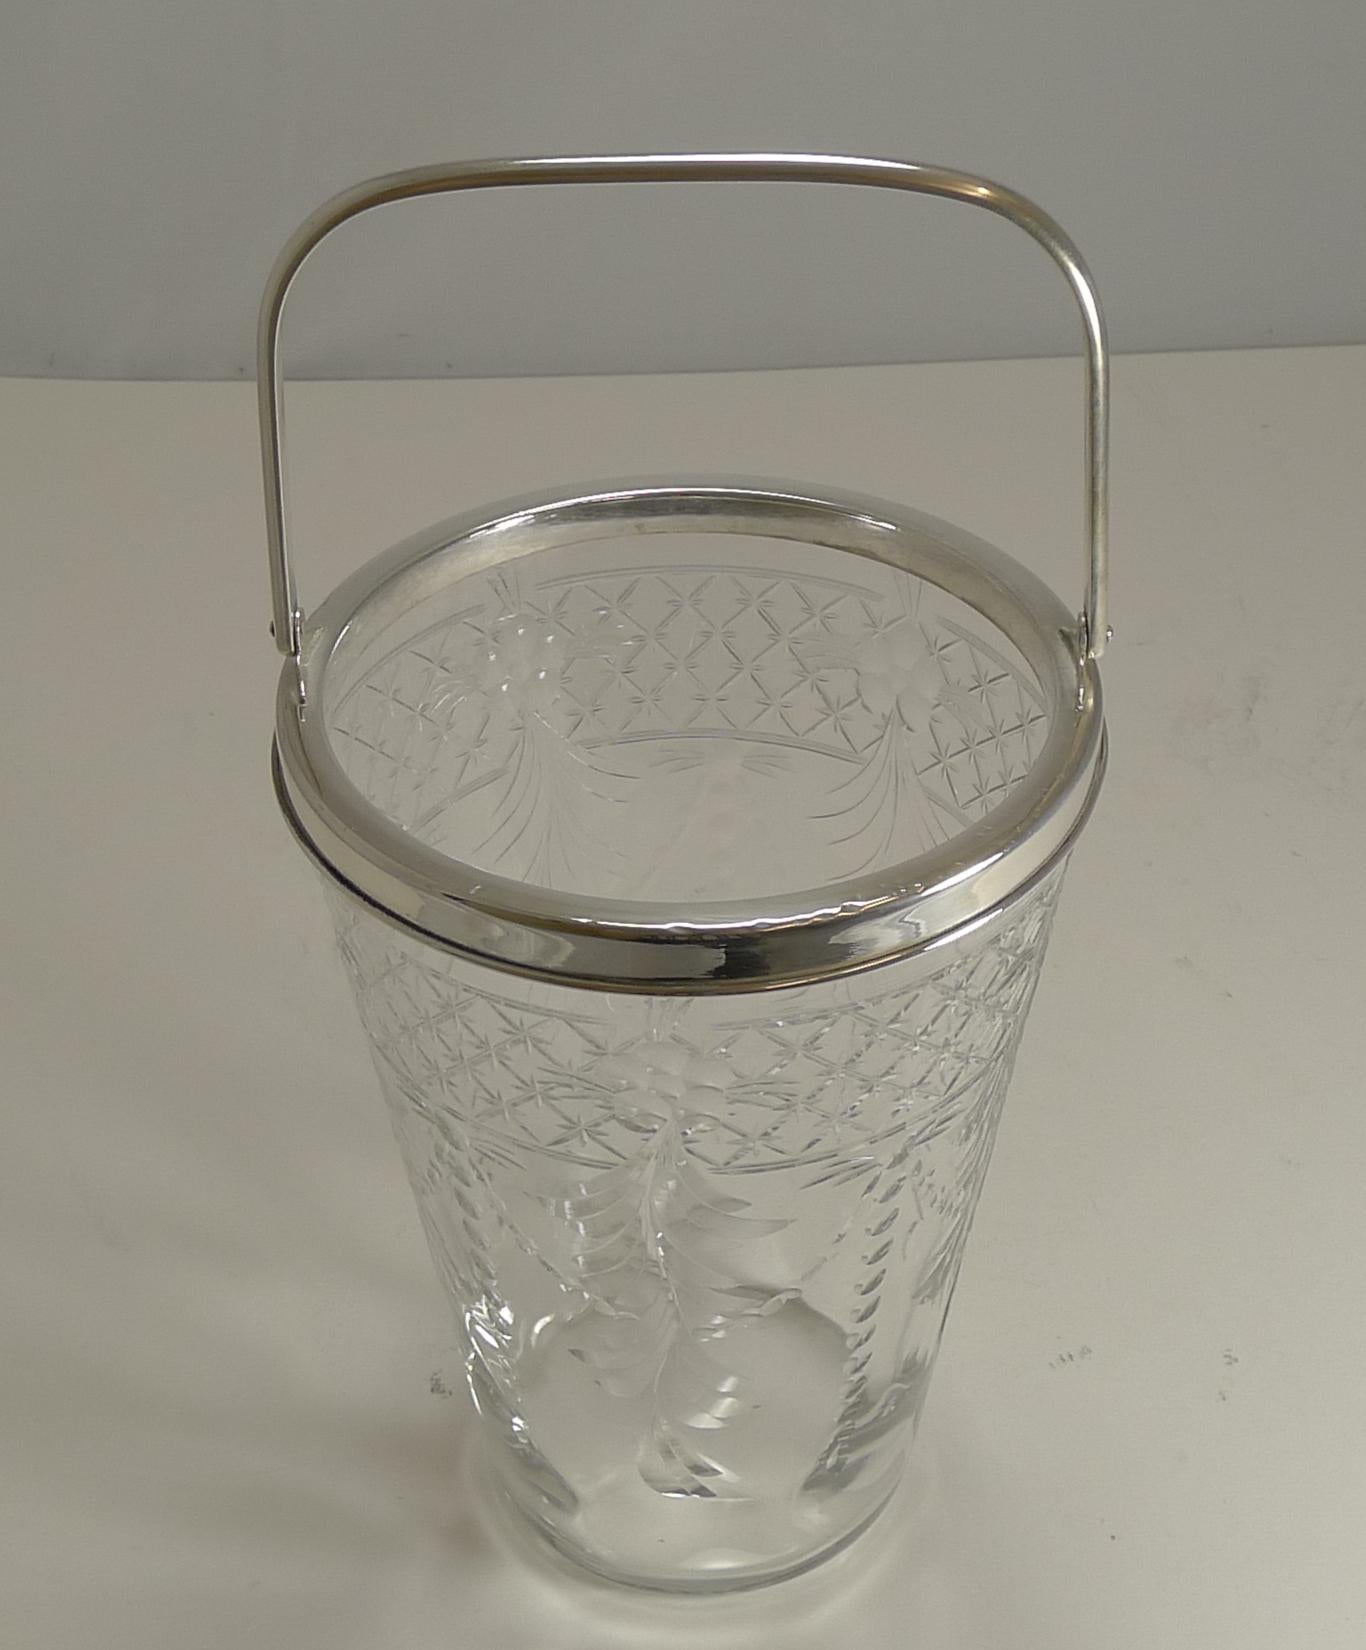 A wonderful slim and tall ice bucket ready to fill with cubes and adorn the finest of bars.

Edwardian in era, dating to circa 1910, the glass is quite exquisite with fine hand-engraved work.

The fittings are silver plate. Excellent all round